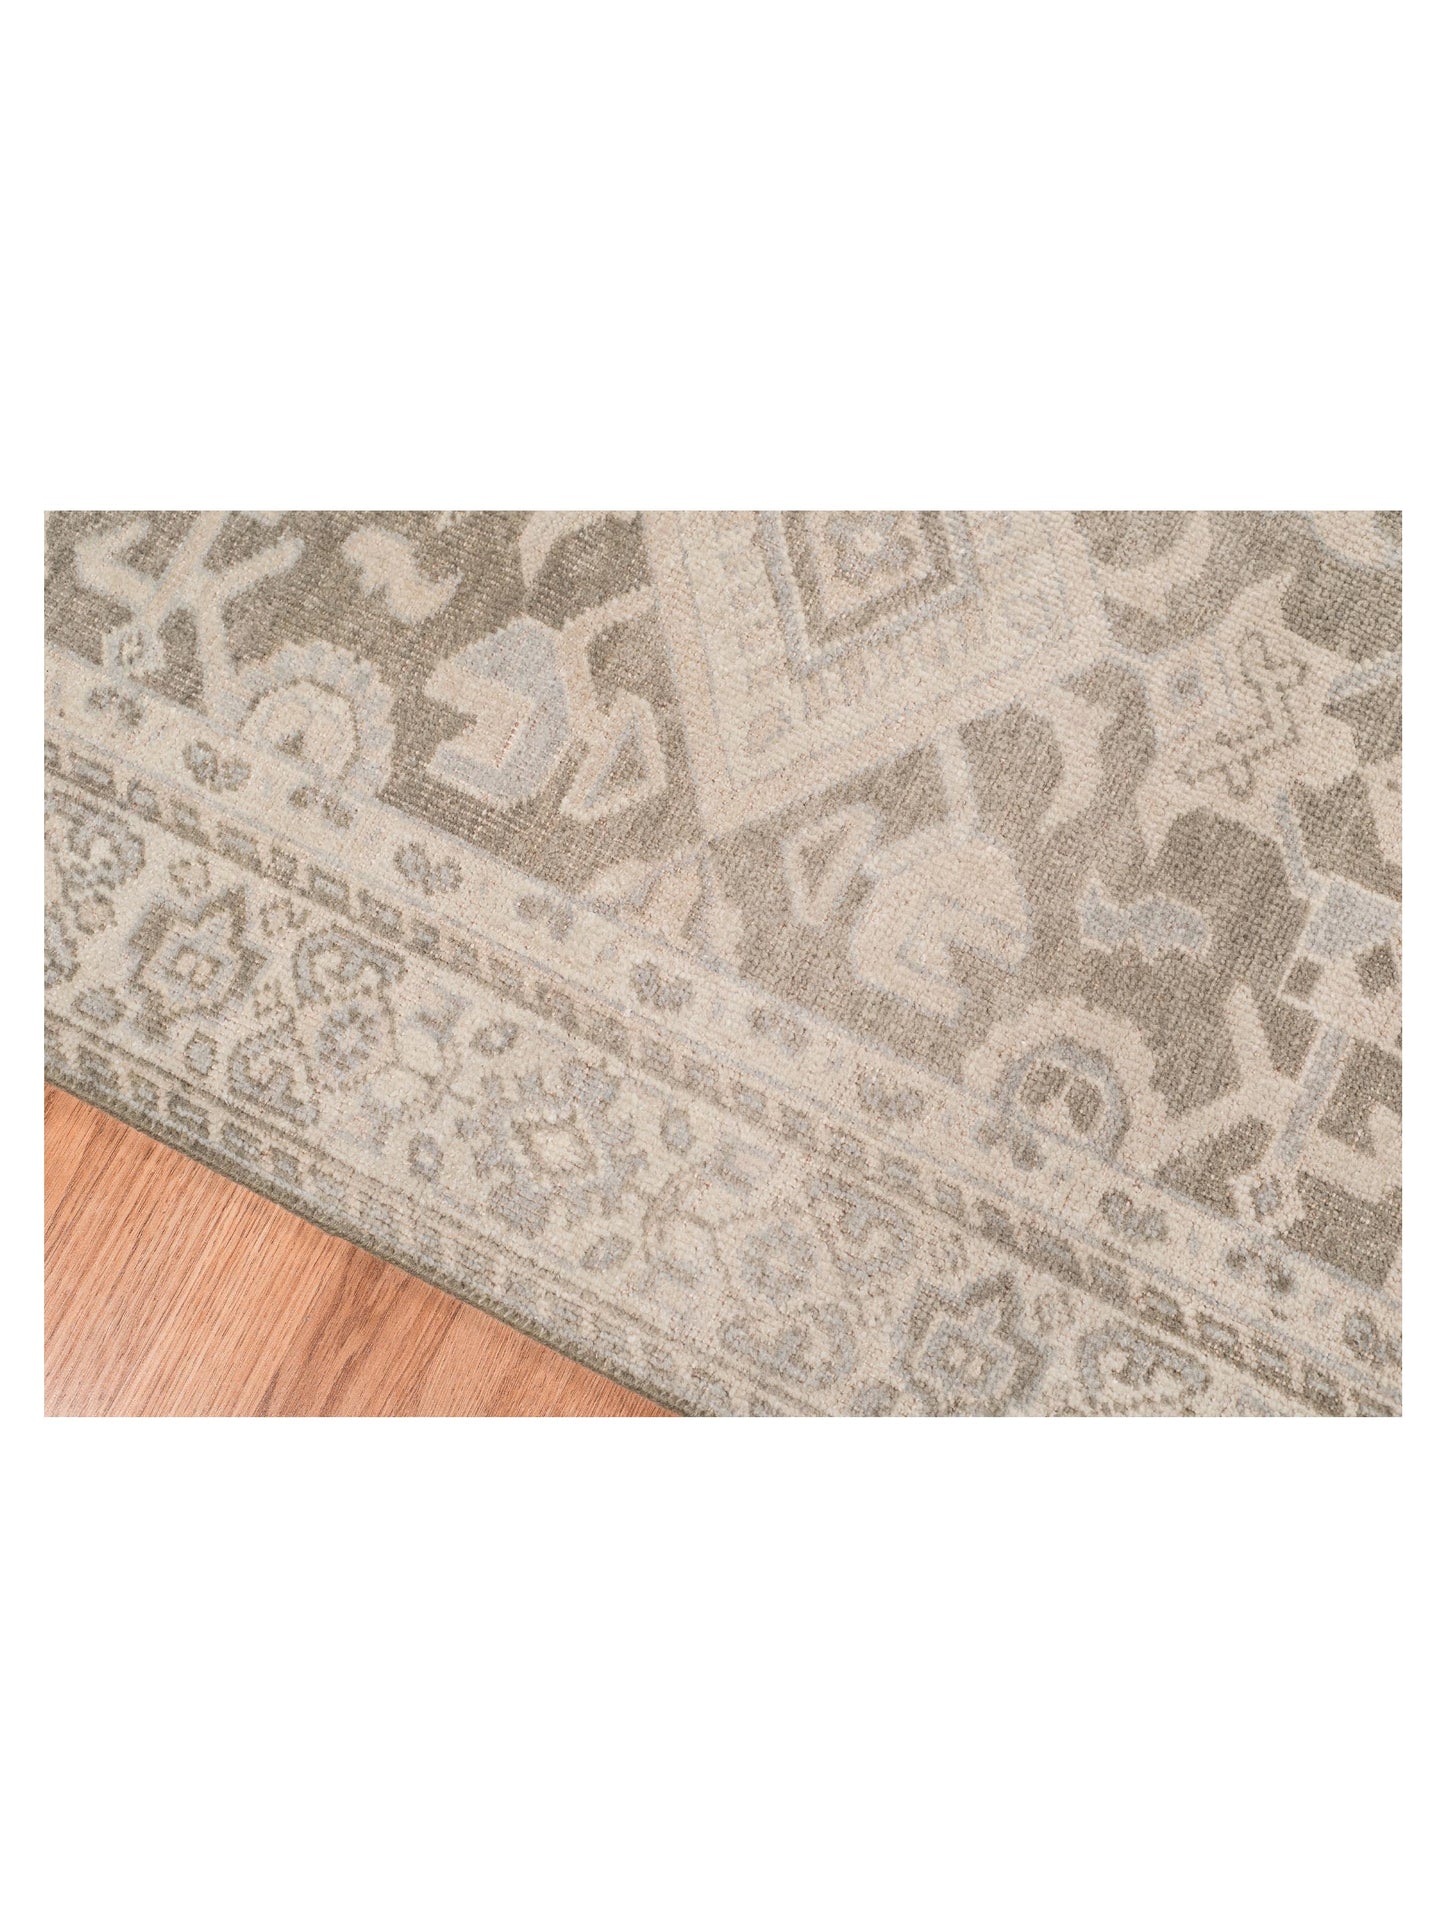 Limited ALBURY AL-351 SANTAS GRAY Traditional Knotted Rug